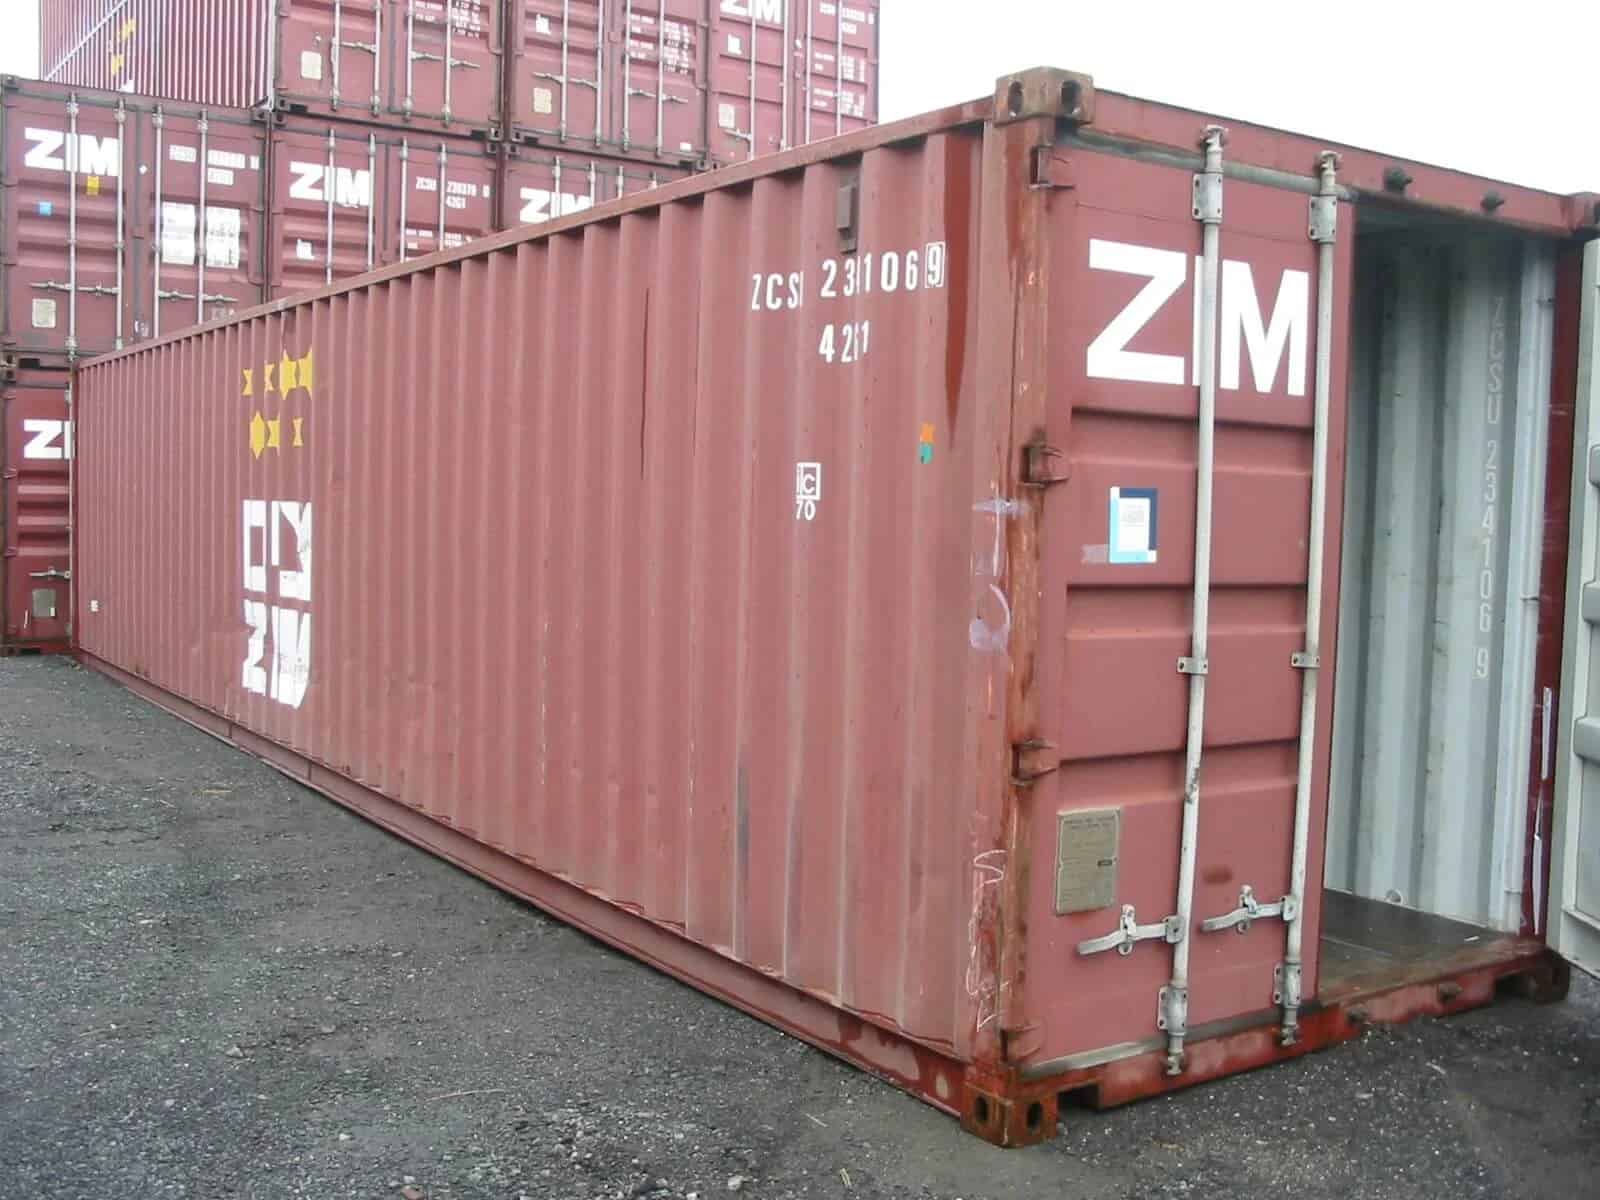 Buy Used Shipping Containers in Massachusetts